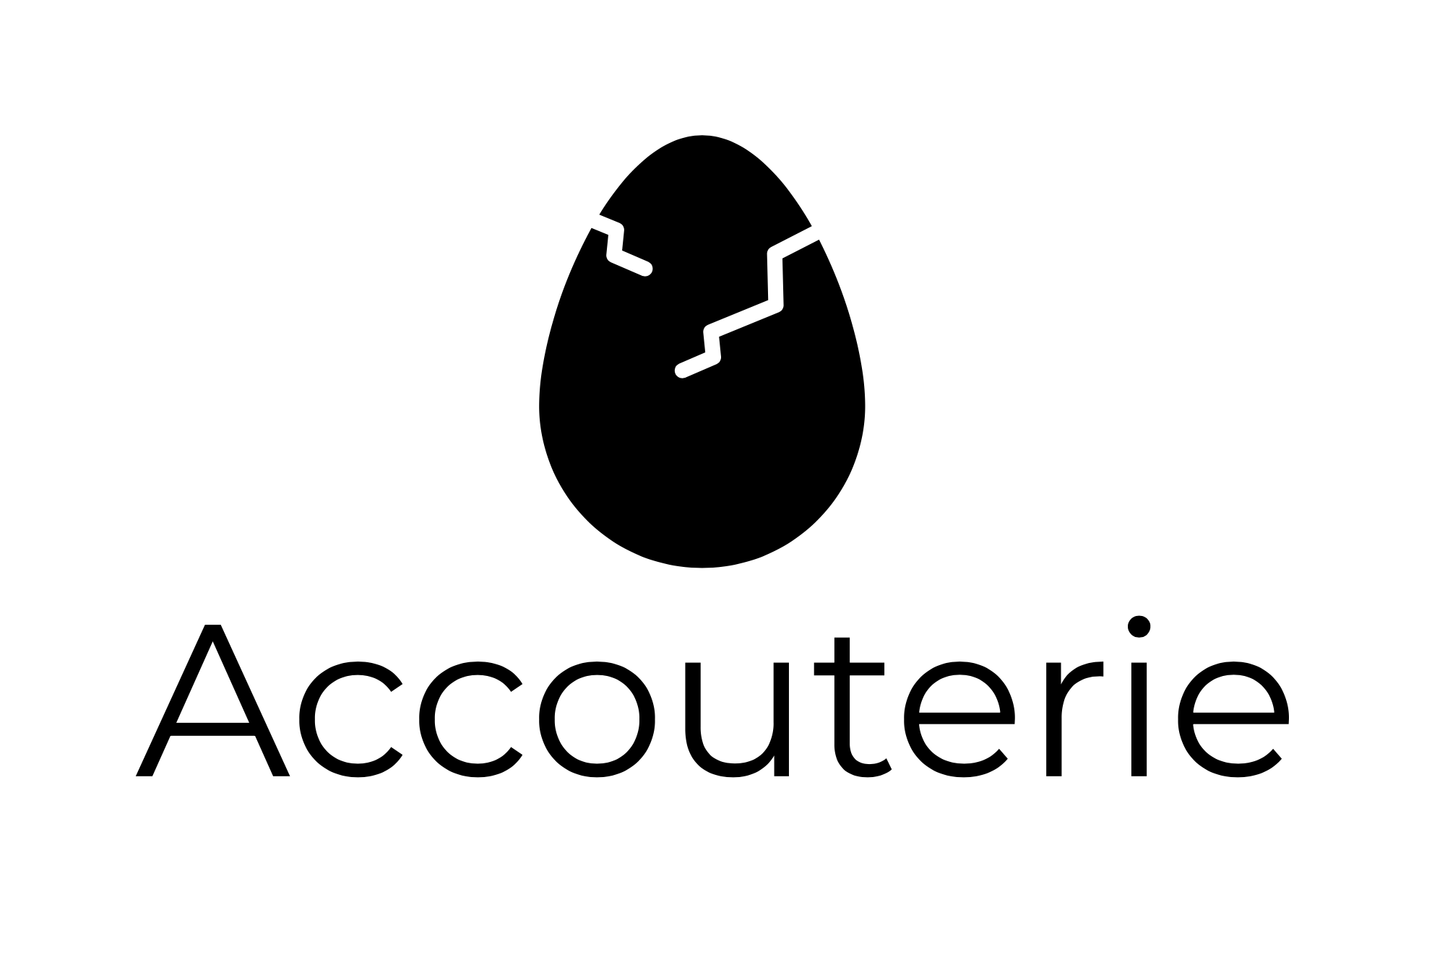 The Accouterie logo - a black egg hatching as depicted by two cracks at the top, and Accouterie written below.